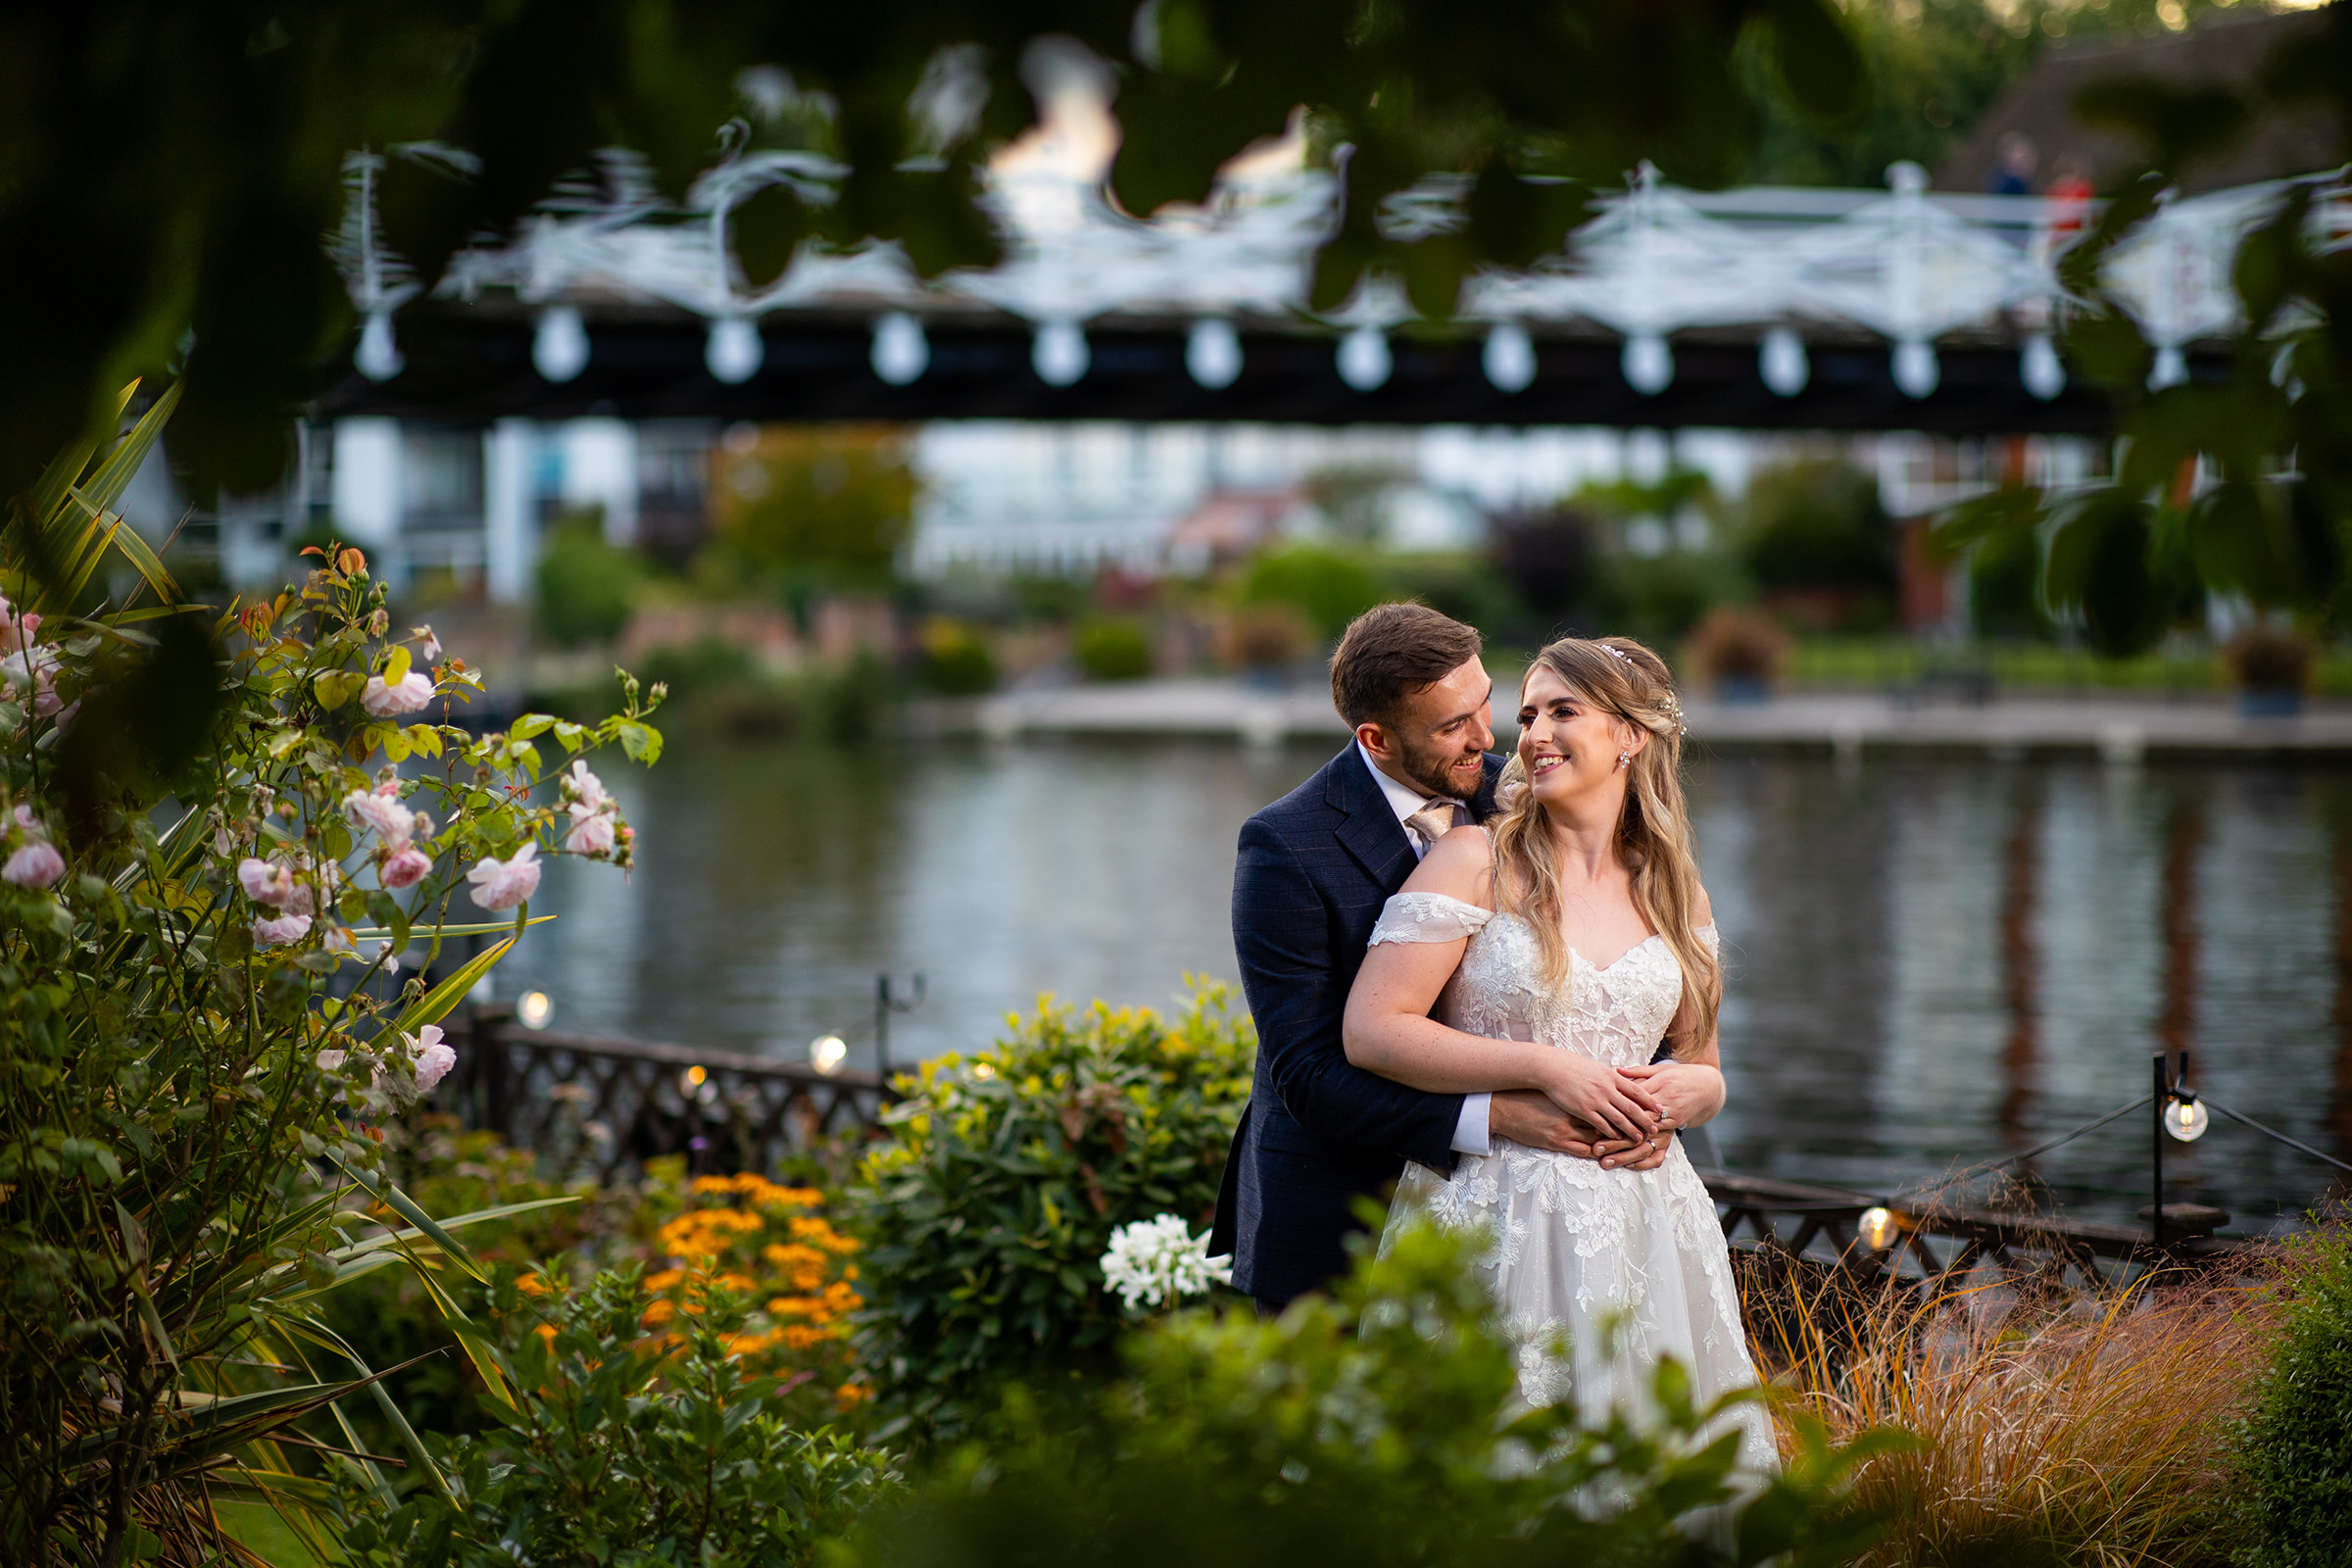 bride & groom wedding day portrait by the river thames marlow